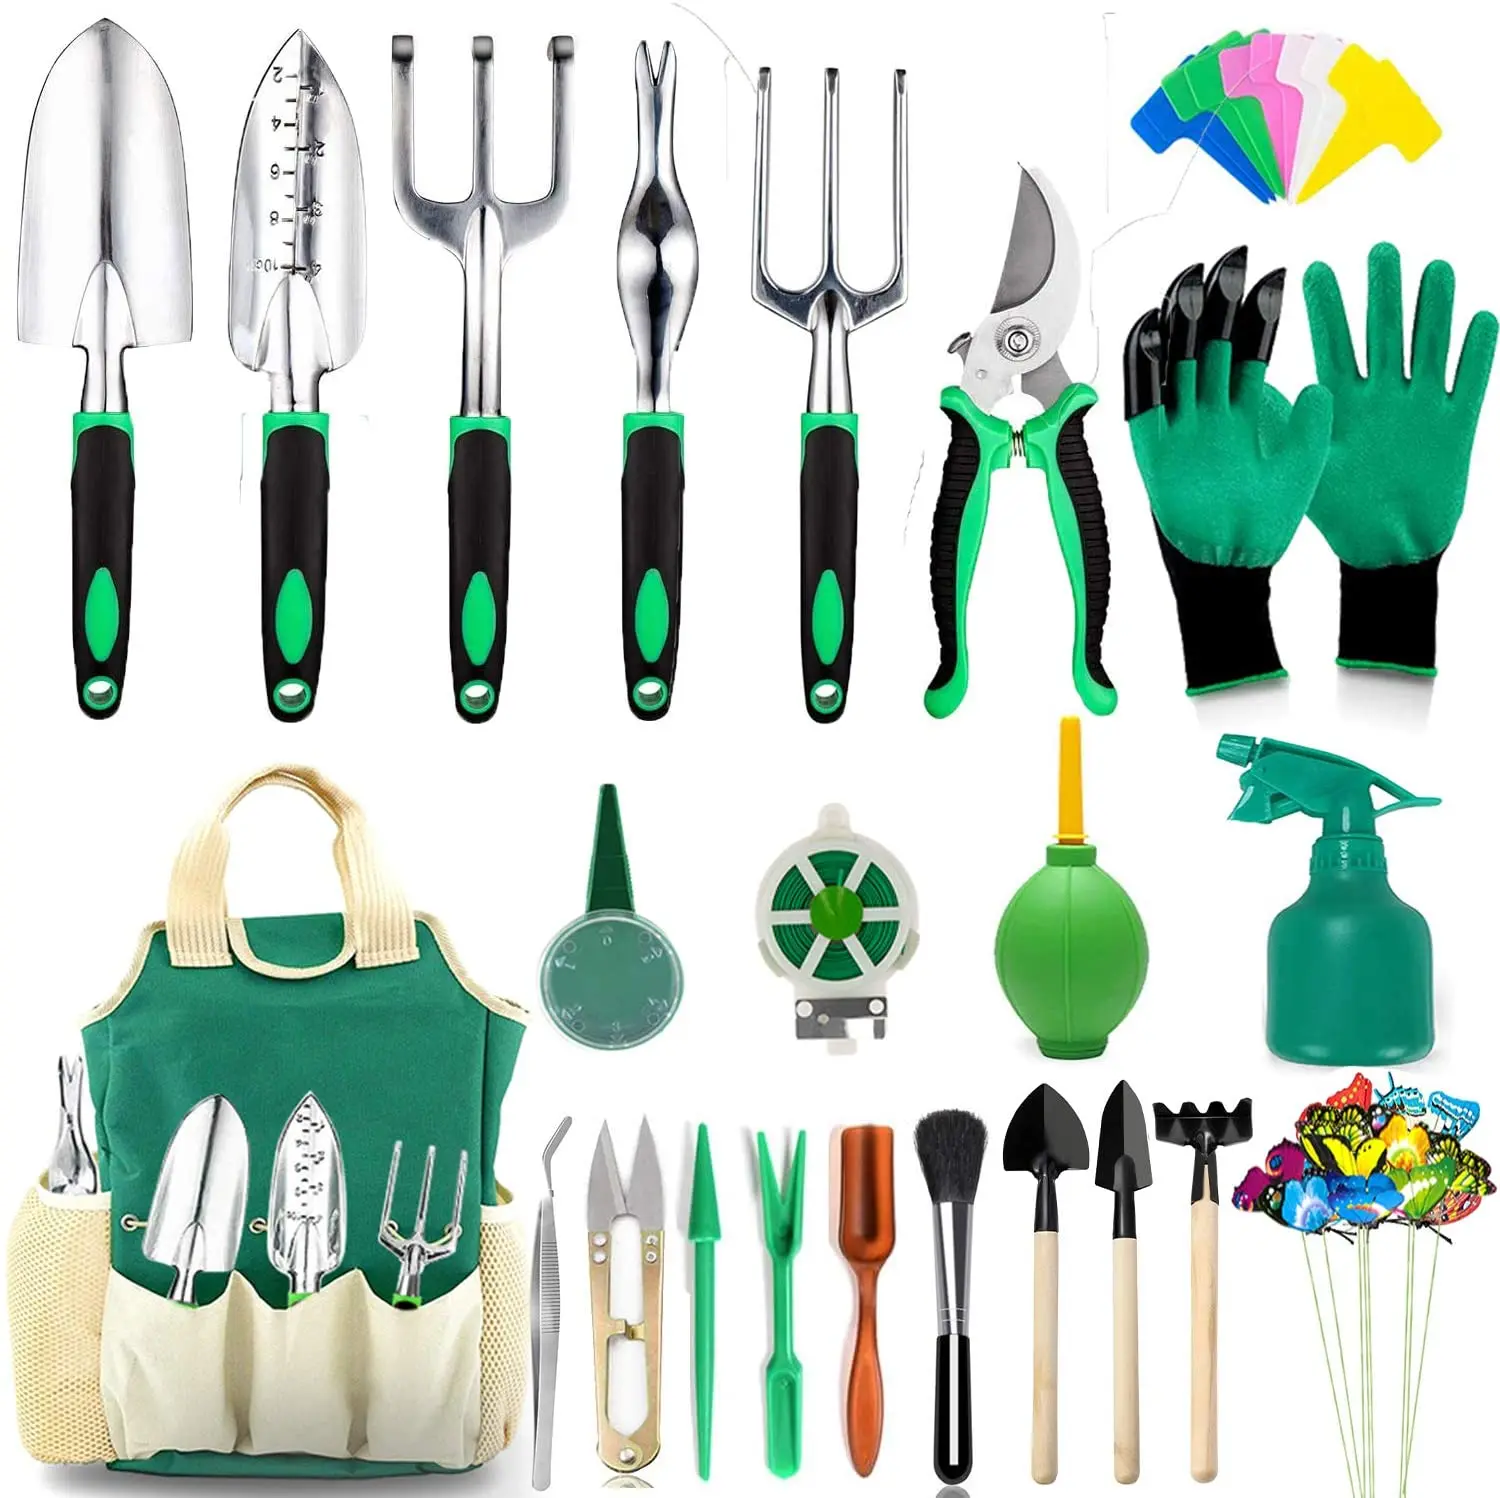 Outry Garden Tool Set 5 Piece Aluminum Heavy Duty Garden Hand Tools Kit with Non-Slip Rubber Grip Outdoor Gardening Gift Tool Set for Men and Women 